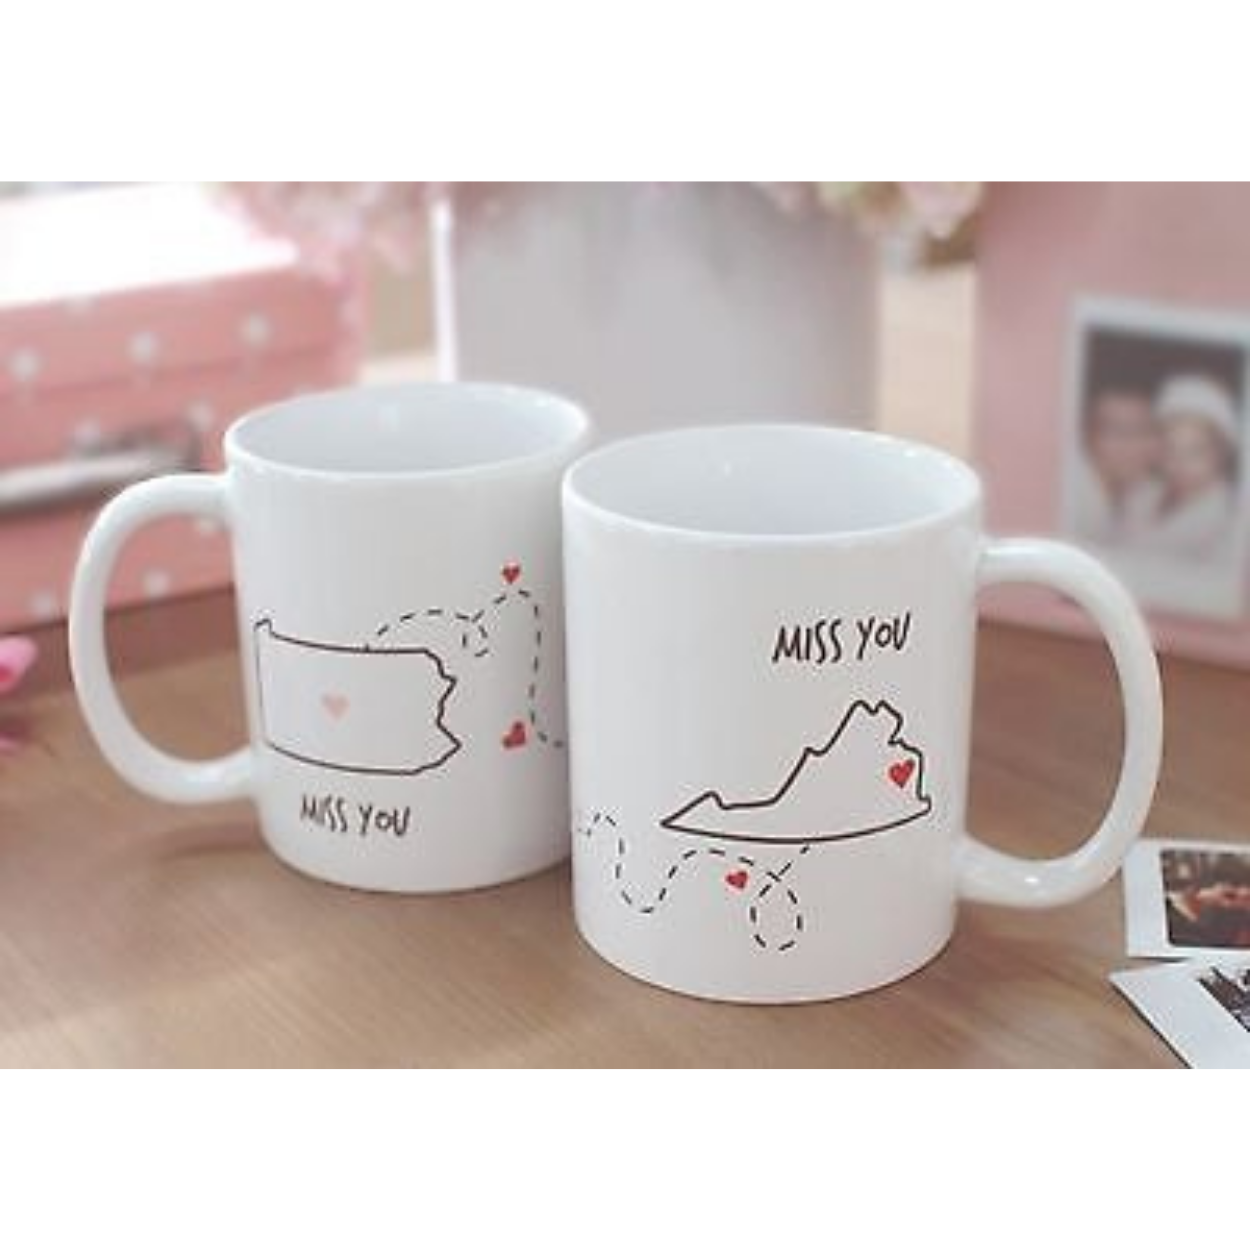 Miss You - Customizable Matching Coffee Mug Sets for Couples and Friends (MC030) White